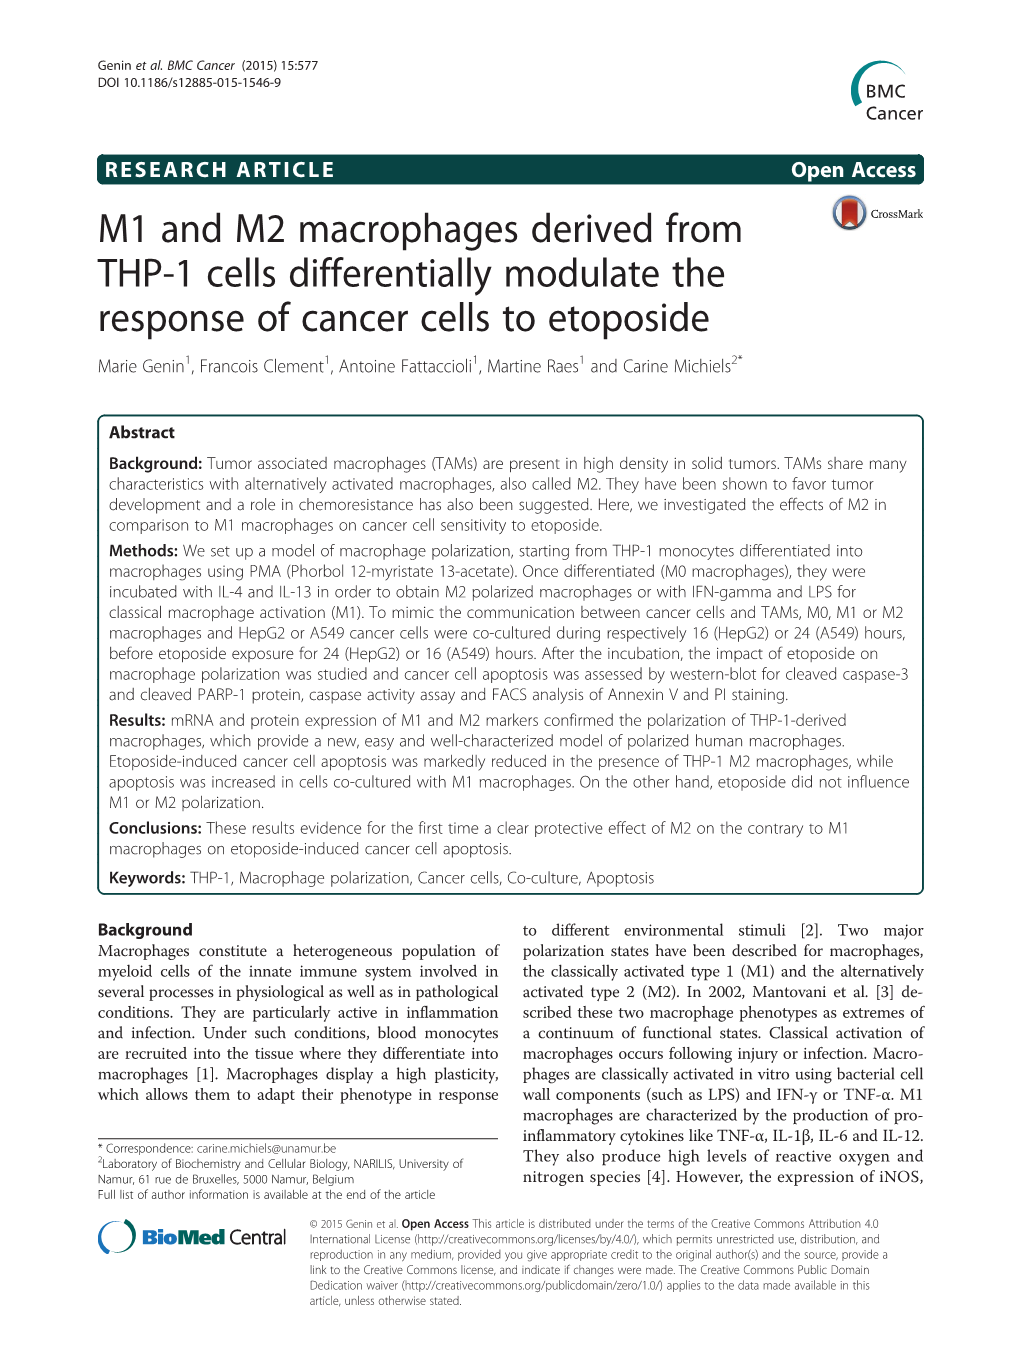 M1 and M2 Macrophages Derived from THP-1 Cells Differentially